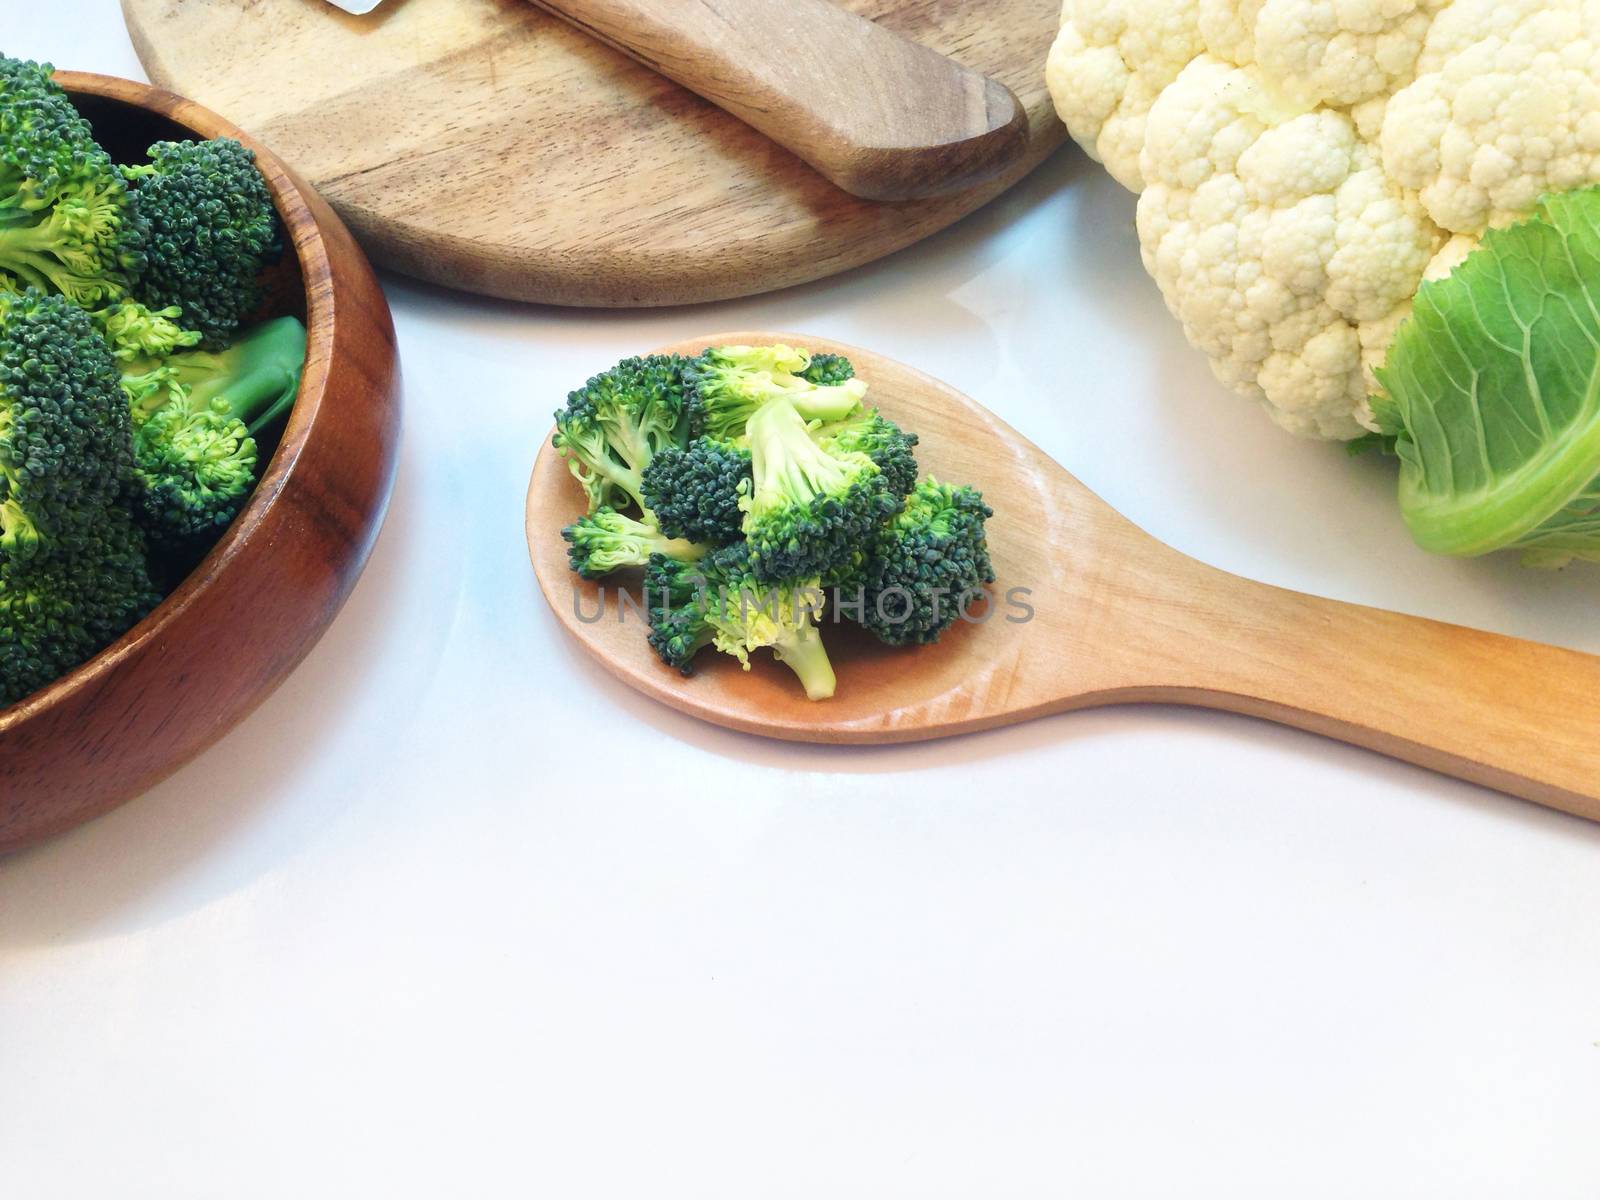 Broccoli in wooden bowl by Bowonpat